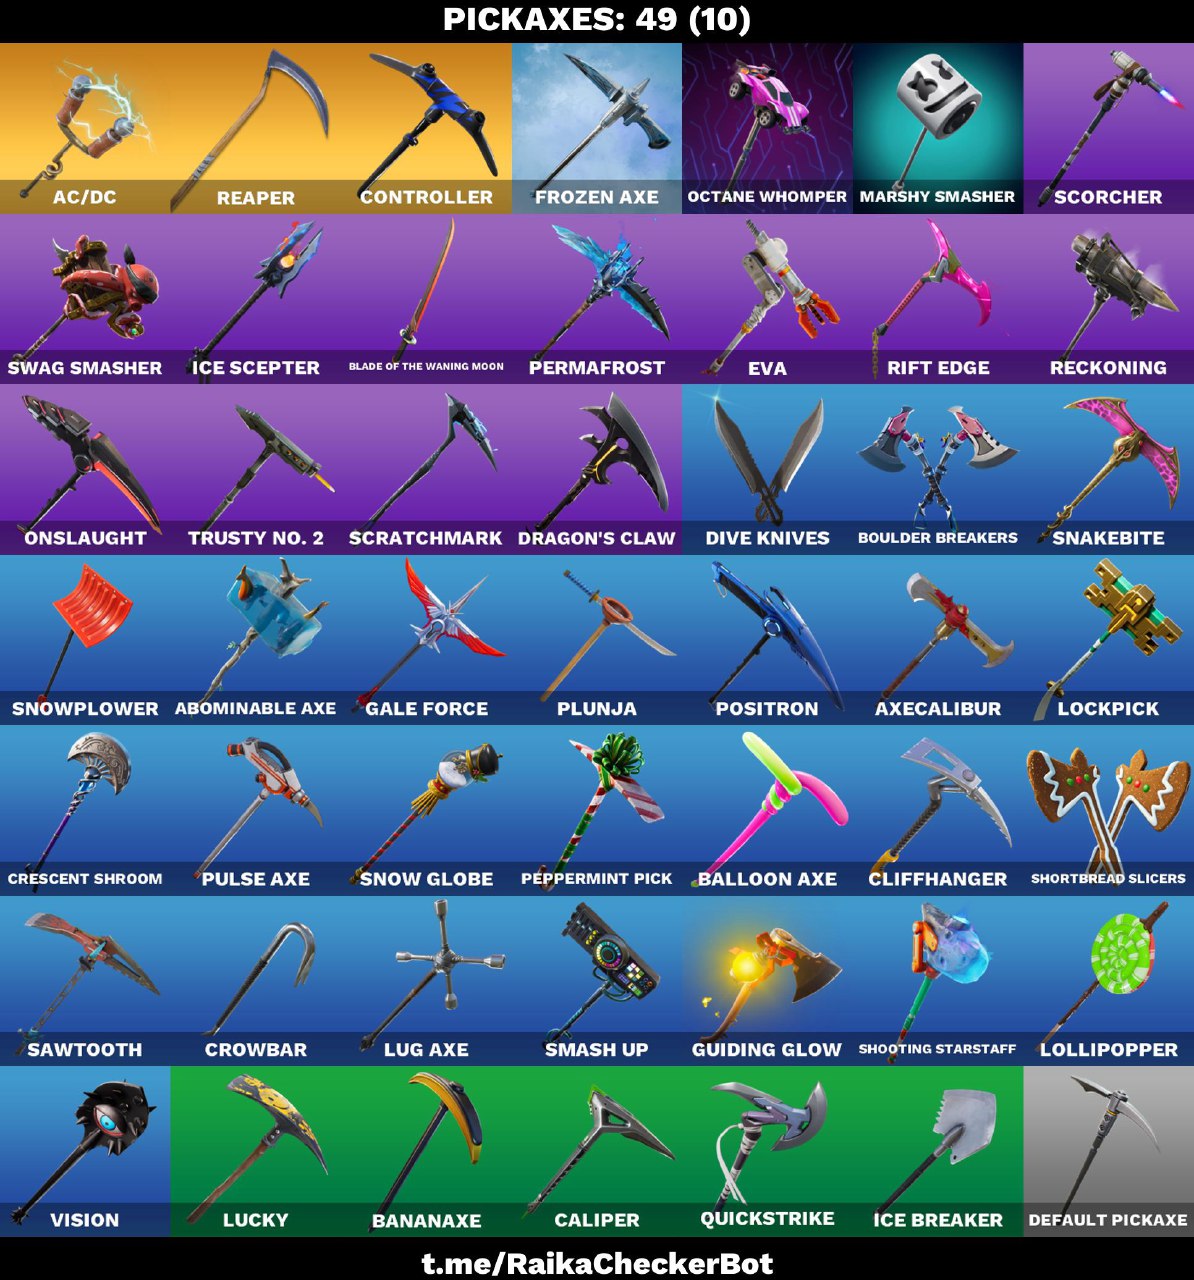 FA | 62 OUTFITS | THE REAPER | BLUE TEAM LEADER | BLUE SQUIRE | ROYALE KNIGHT | SPARKLE SPECIALIST | ELITE AGENT | PRODIGY | BLITZ | DIRE